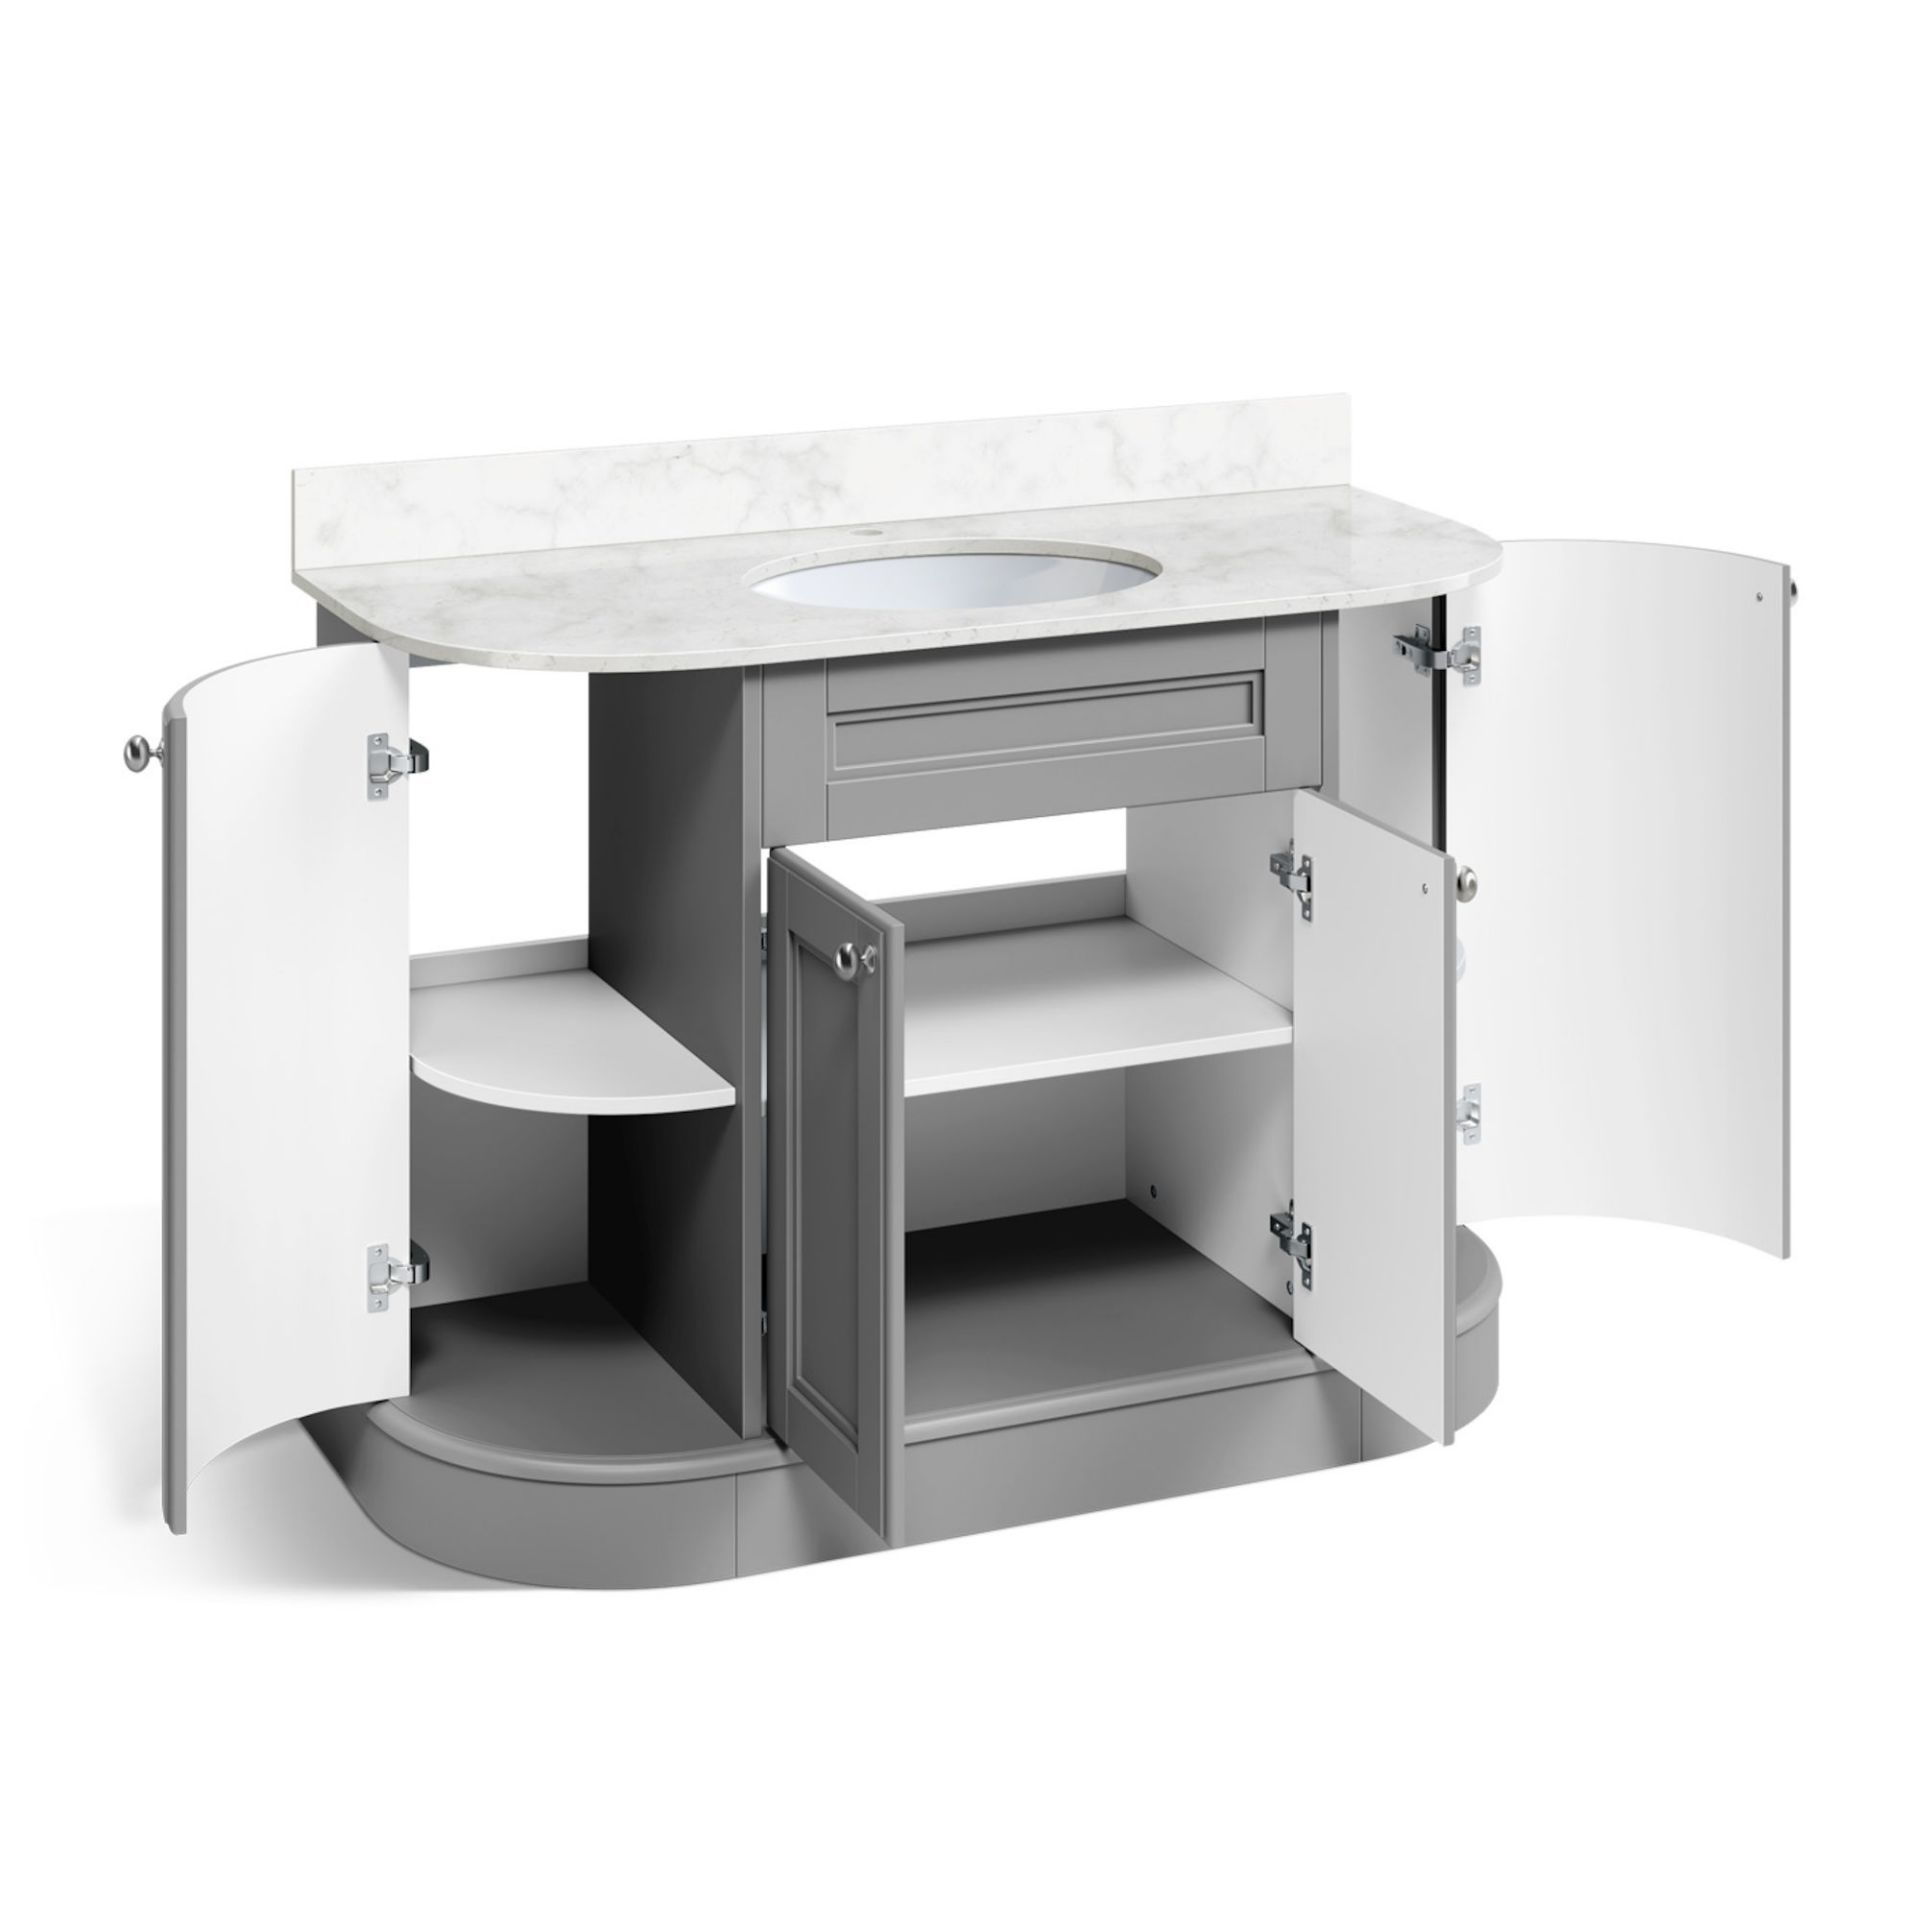 New & Boxed 1200mm York Earl Grey Vanity Unit. RRP £3,499.Comes complete with countertop and ... - Image 3 of 4